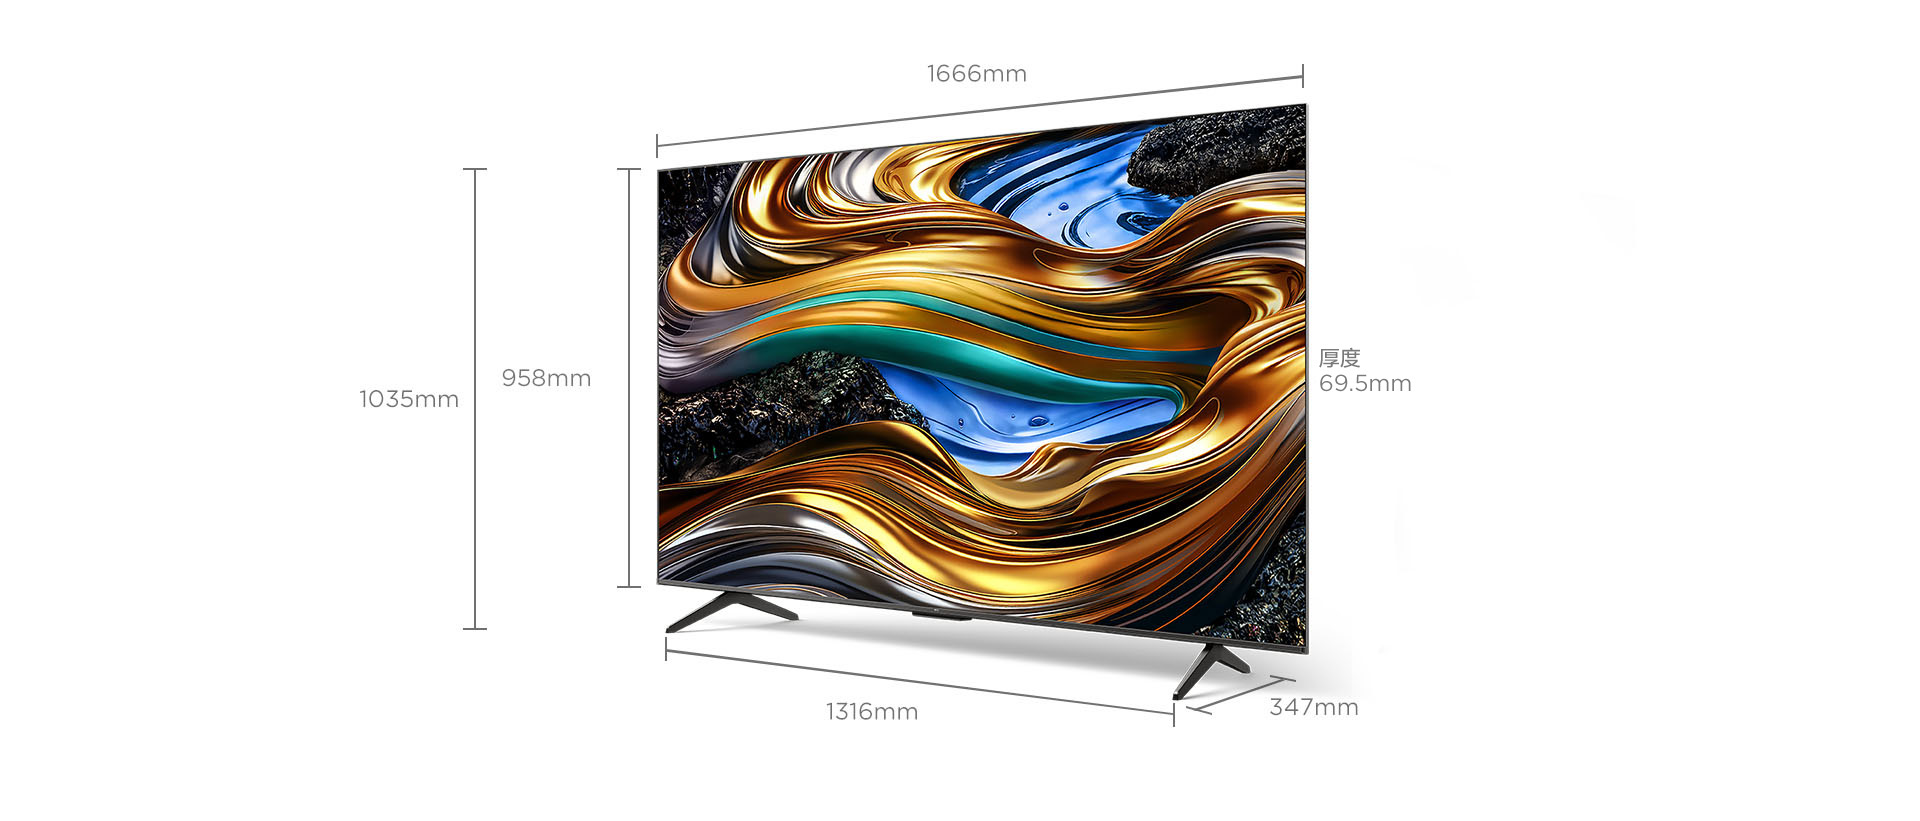 75 inch TCL P755 Smart TV